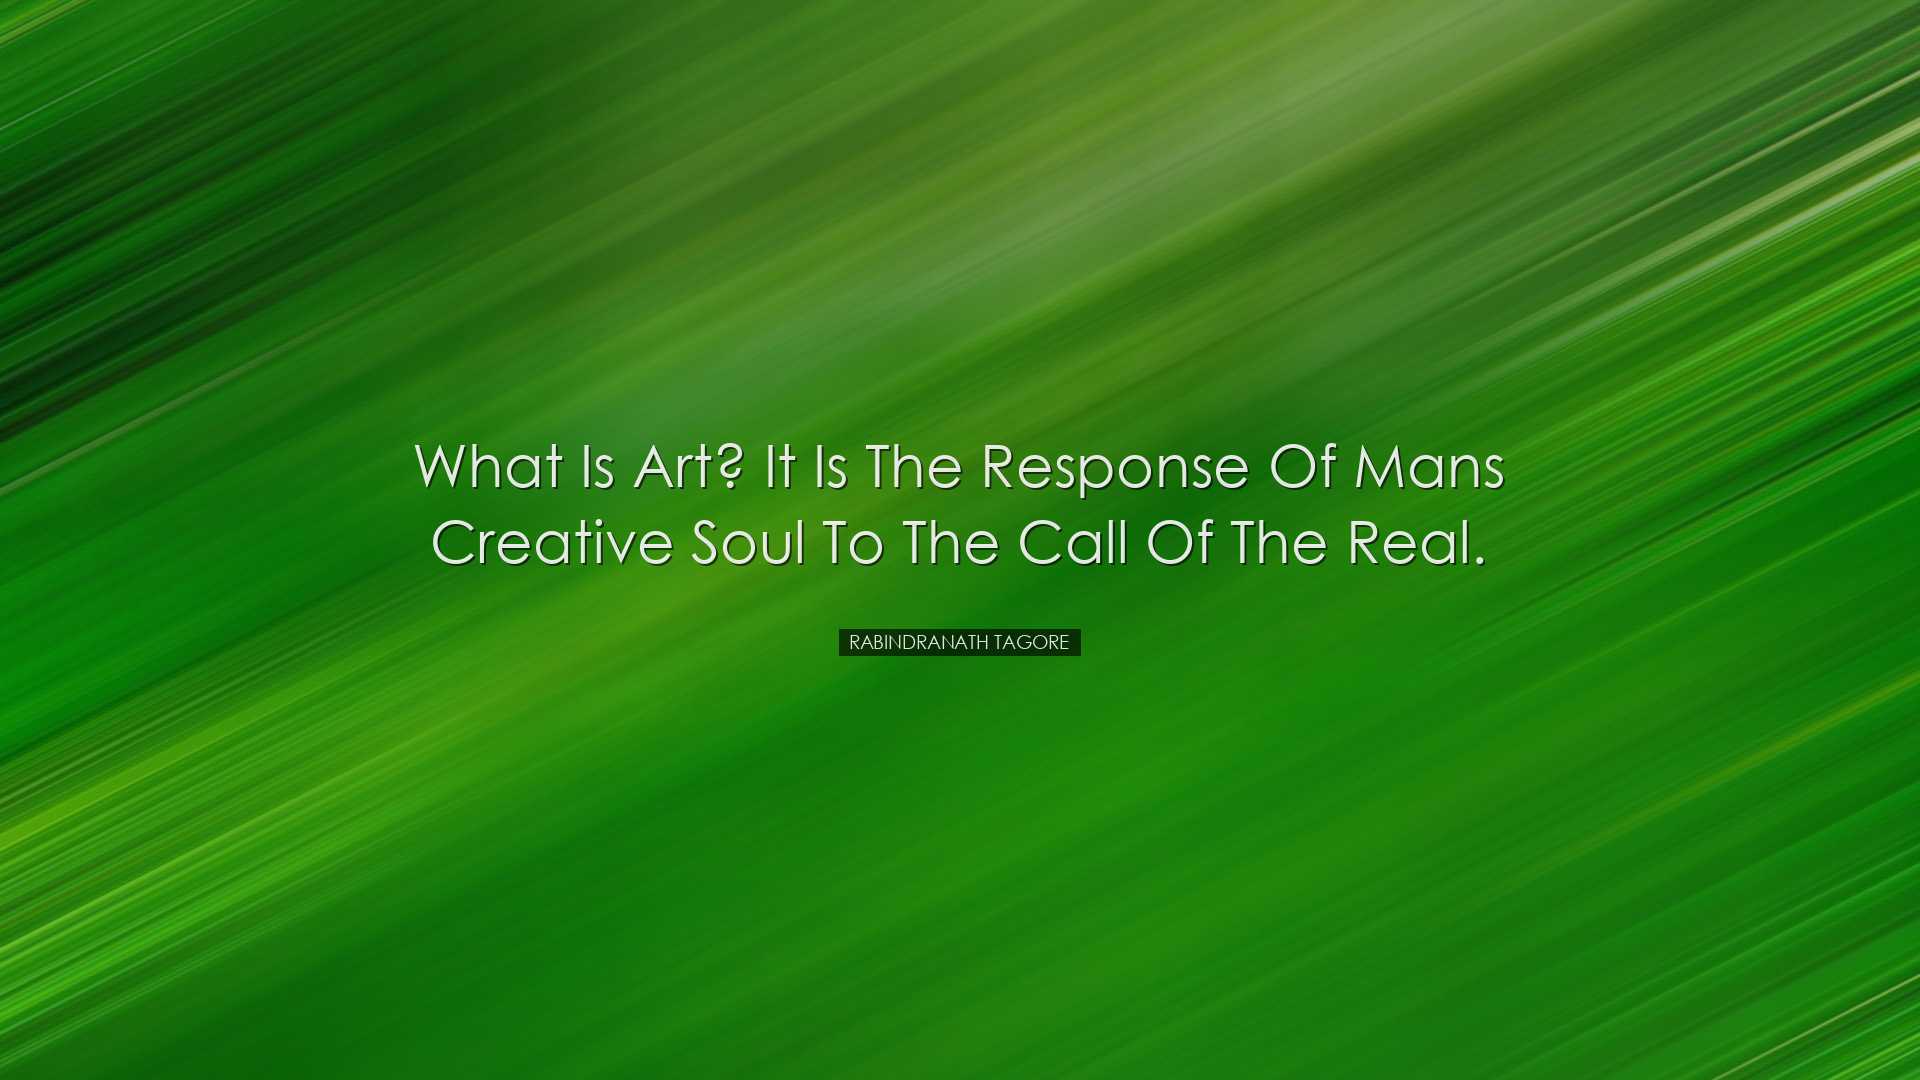 What is Art? It is the response of mans creative soul to the call